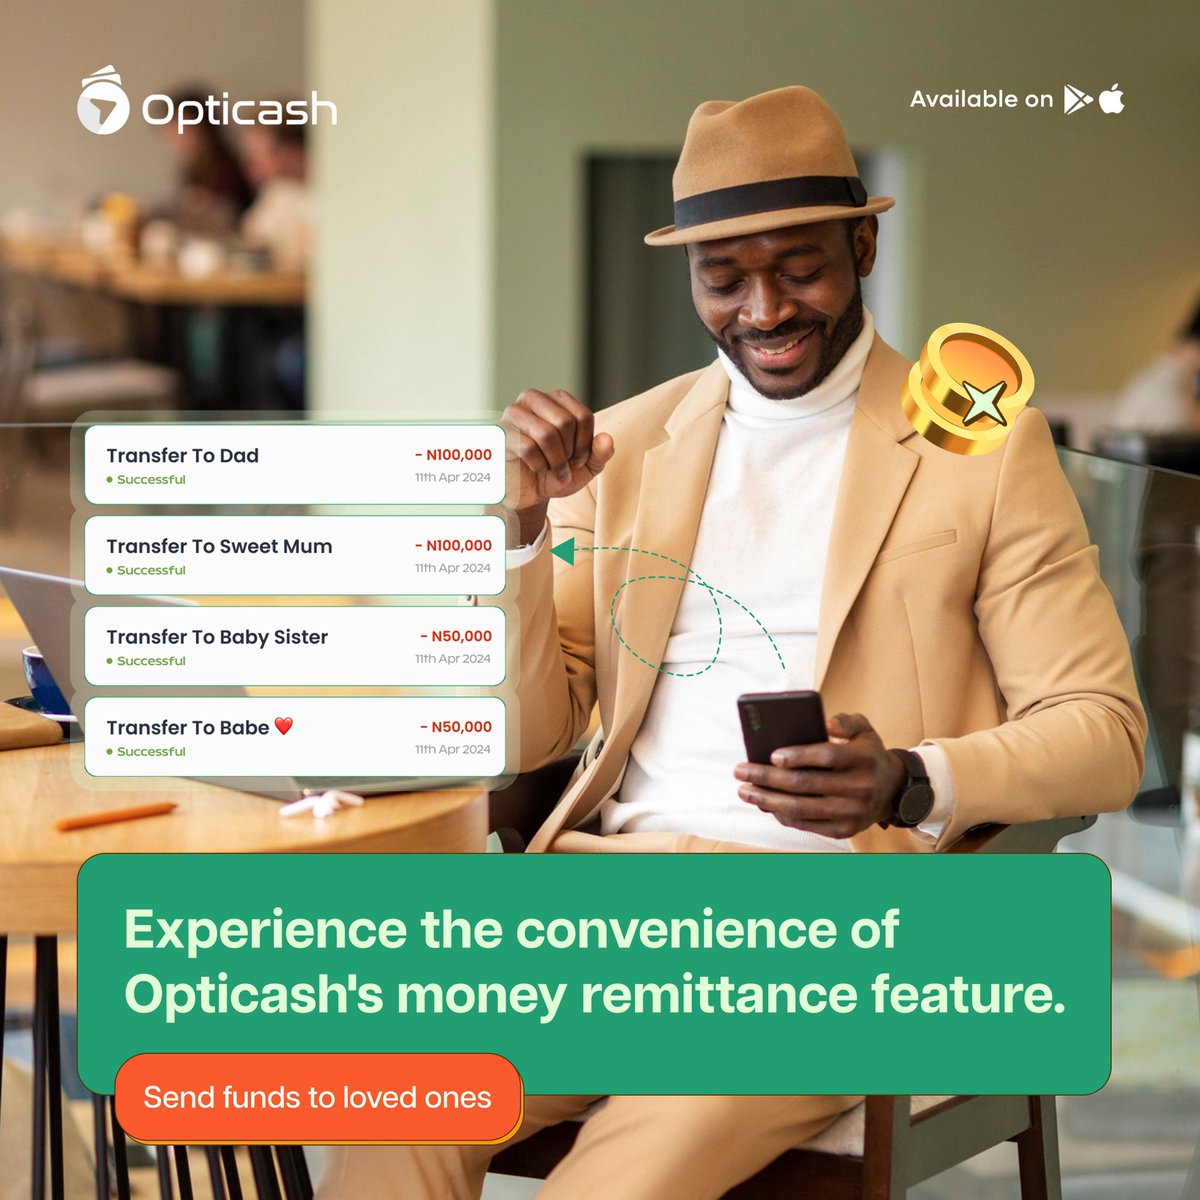 No more long queues or complicated forms. Opticash’s money remittance feature brings you closer to your loved ones with just a few taps.
.
.
#Opticash #Fintechafrica #Crossborderpayments #Sendmoneyabroad